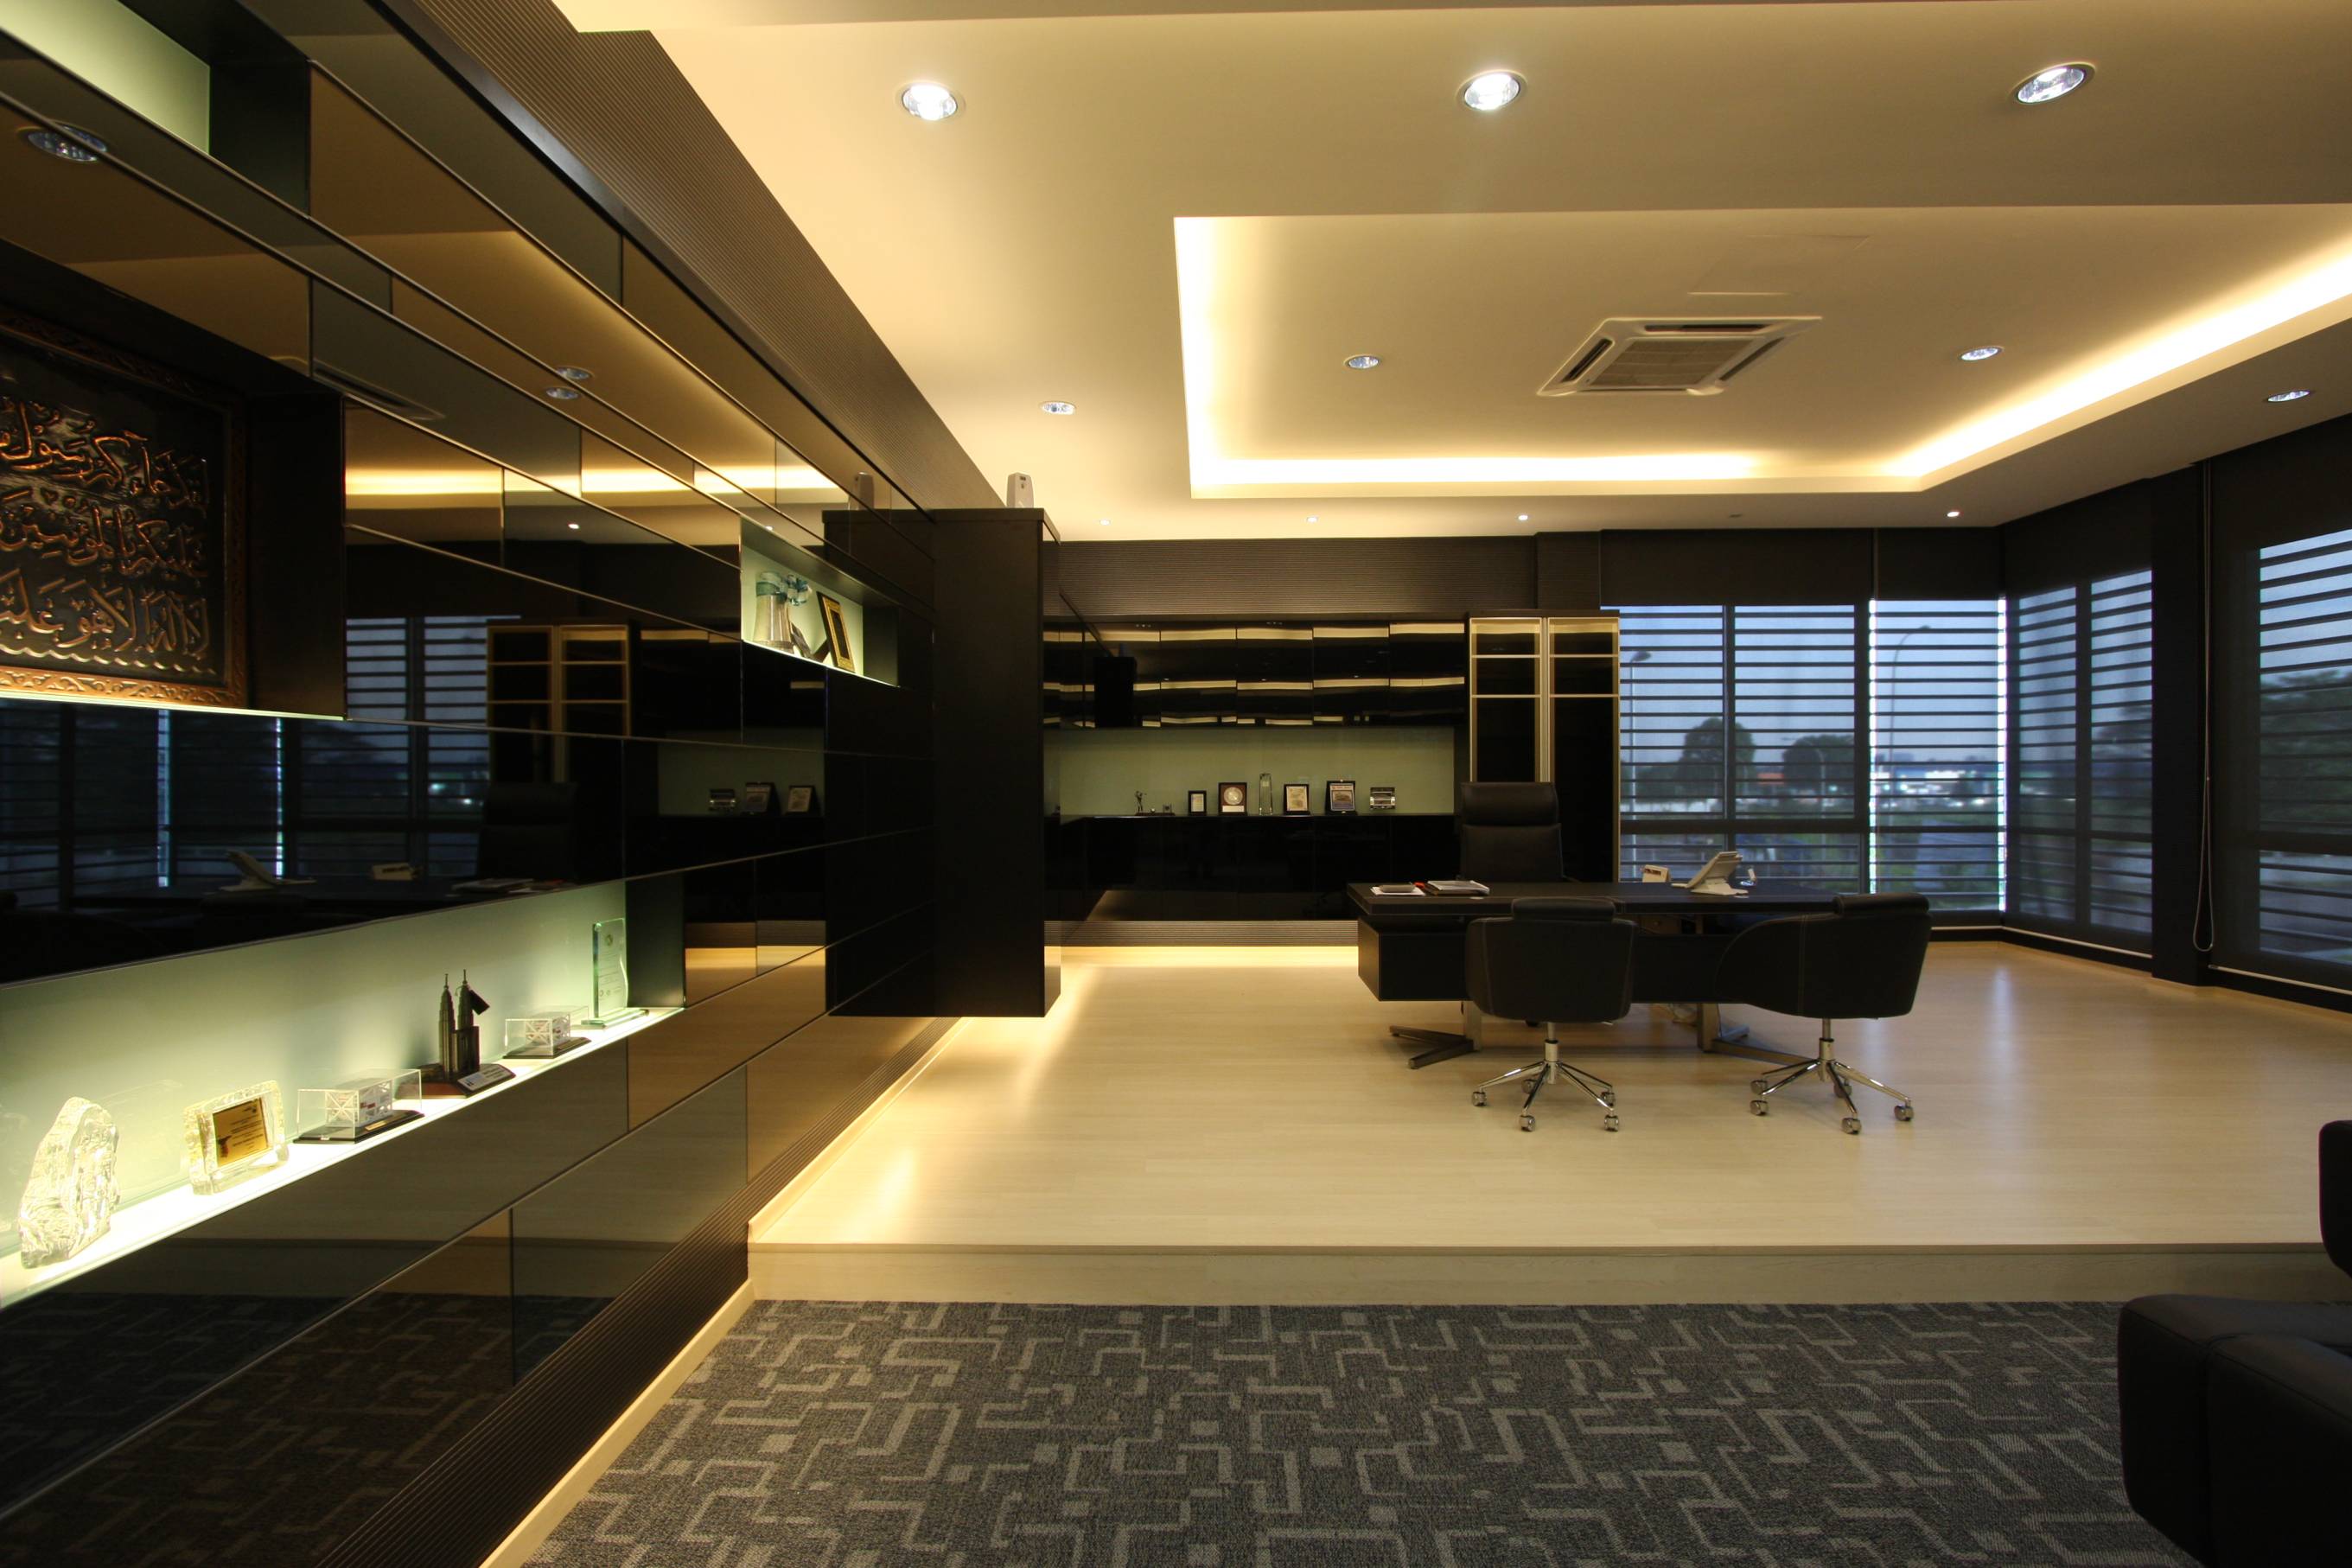 Modern and Functional Office-16026441529.jpg